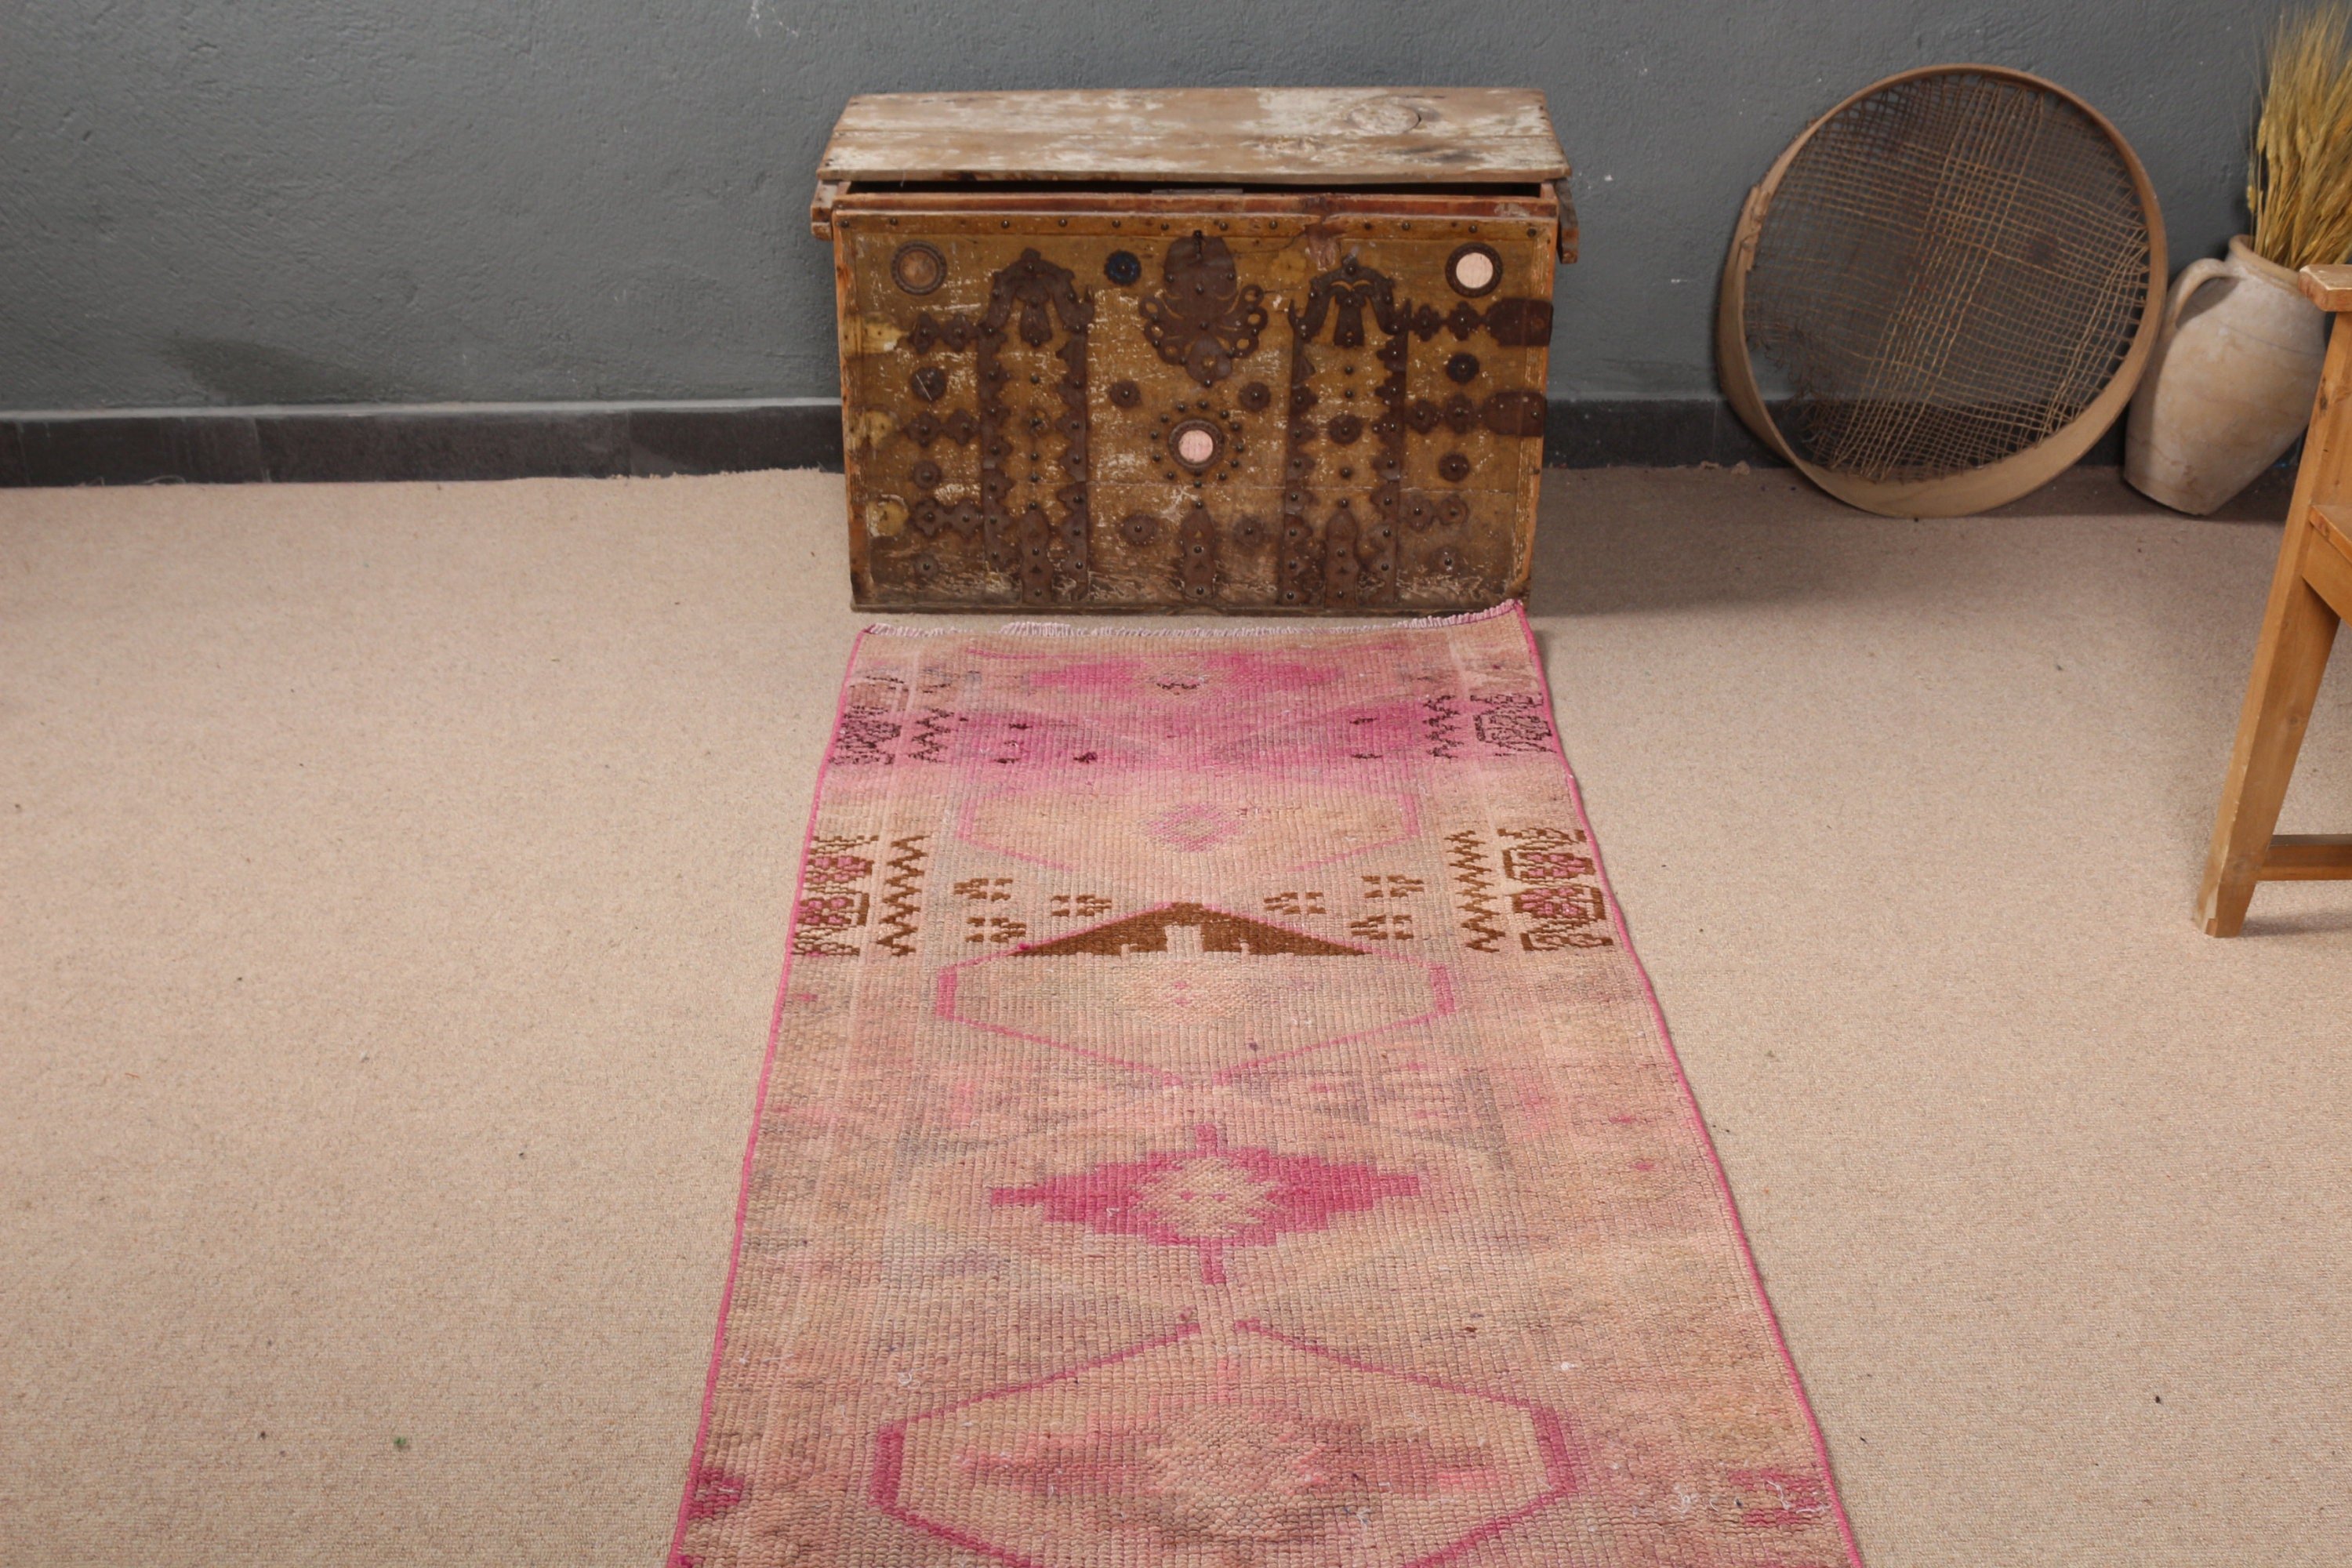 Dorm Rugs, Pink Antique Rug, 2.7x9 ft Runner Rugs, Kitchen Rug, Anatolian Rug, Vintage Rug, Turkish Rug, Rugs for Kitchen, Home Decor Rugs